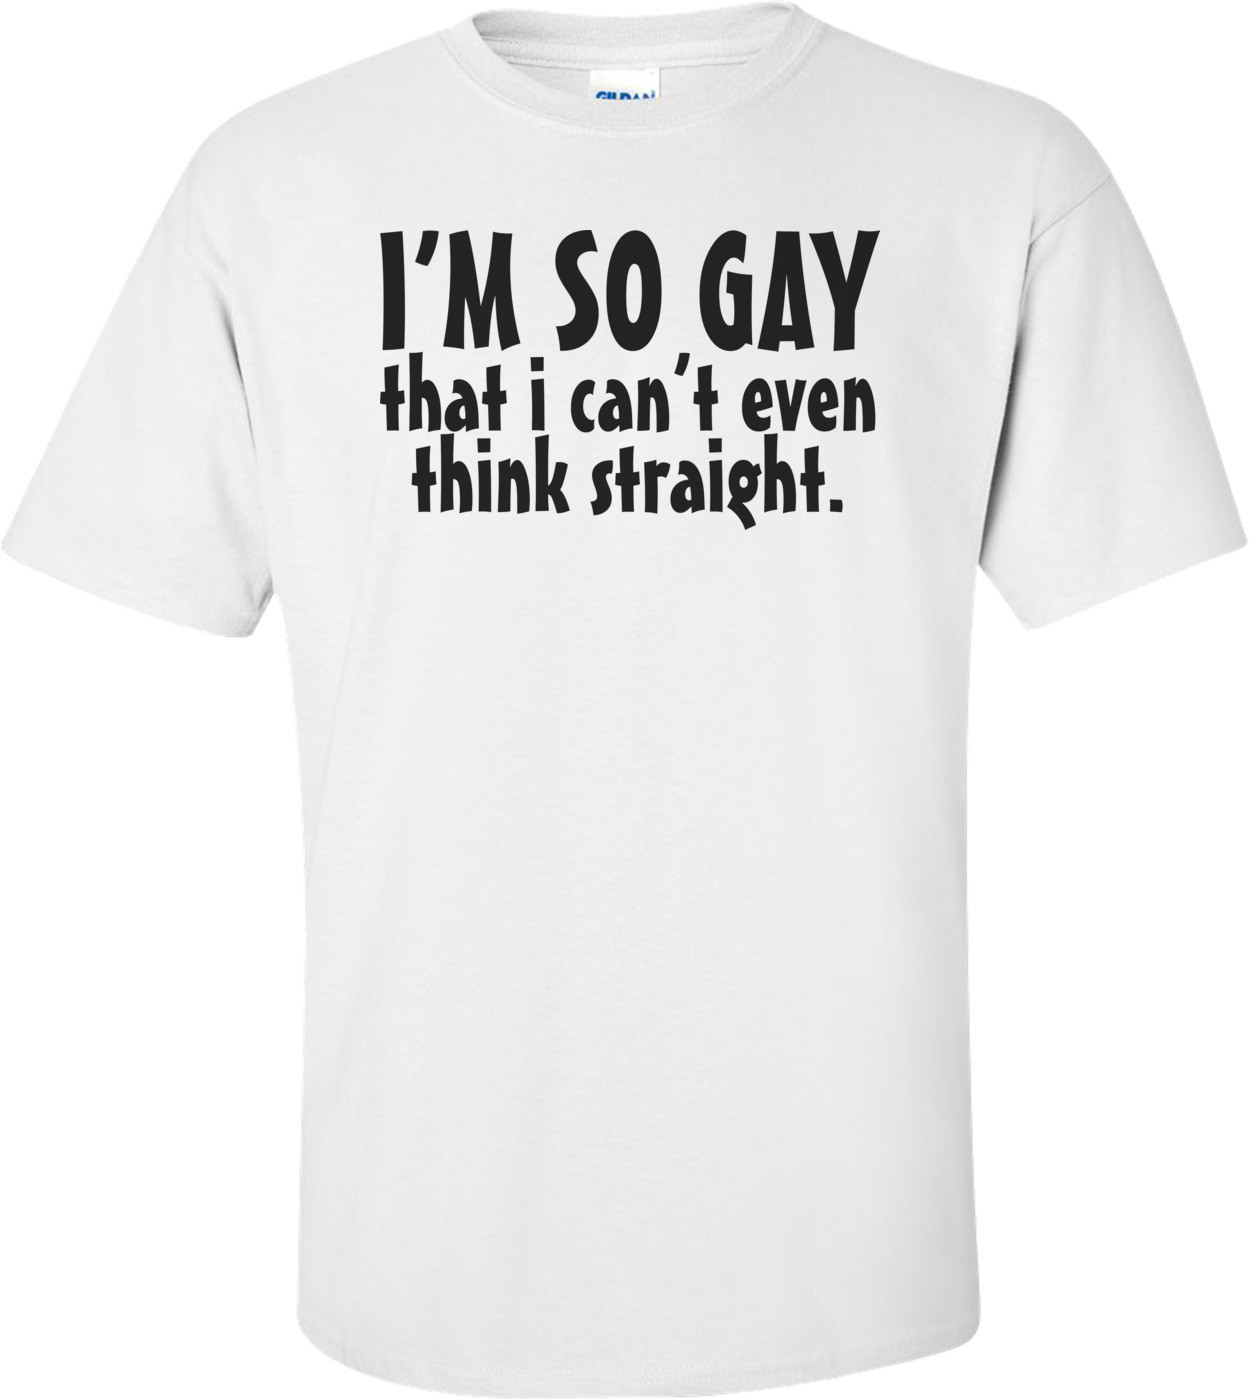 I'm So Gay That I Can't Even Think Straight - Funny